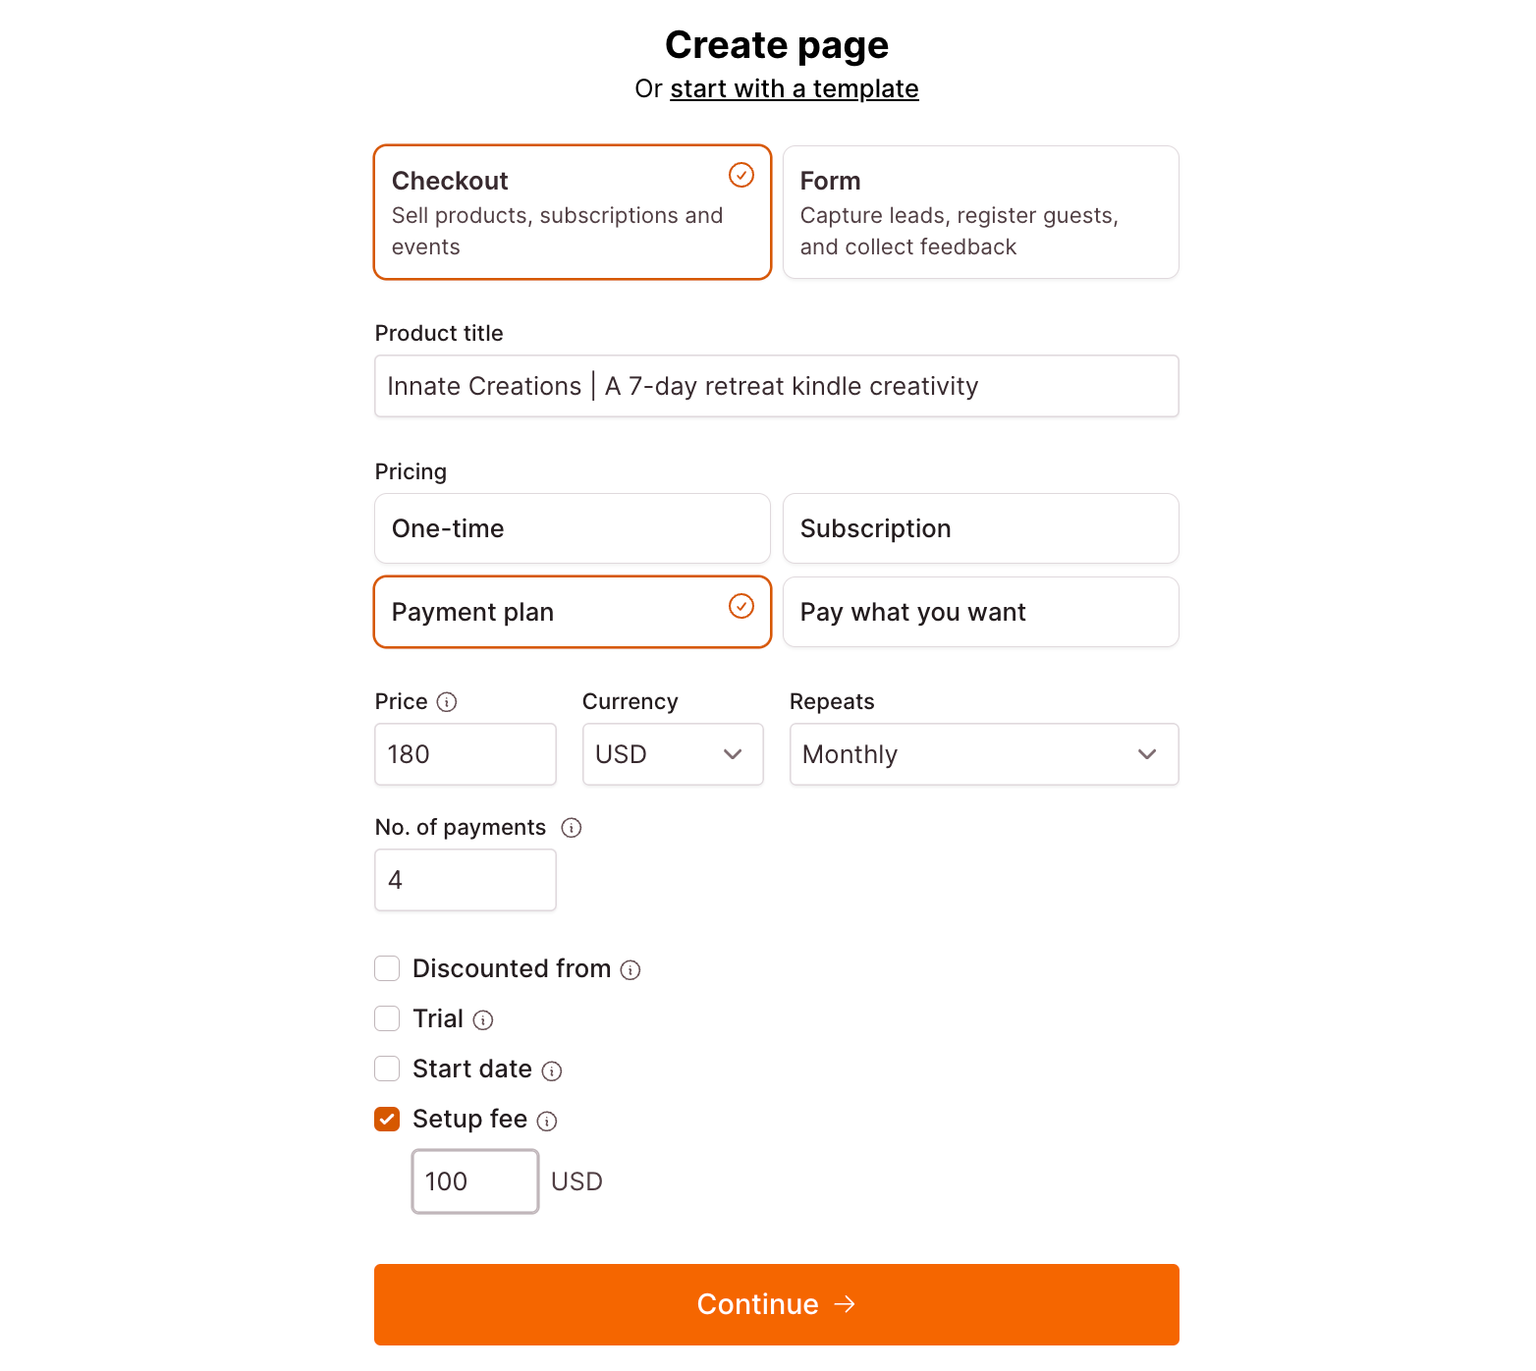 Simple Checkout Page form enabling you to crate a page, title and select a payment type